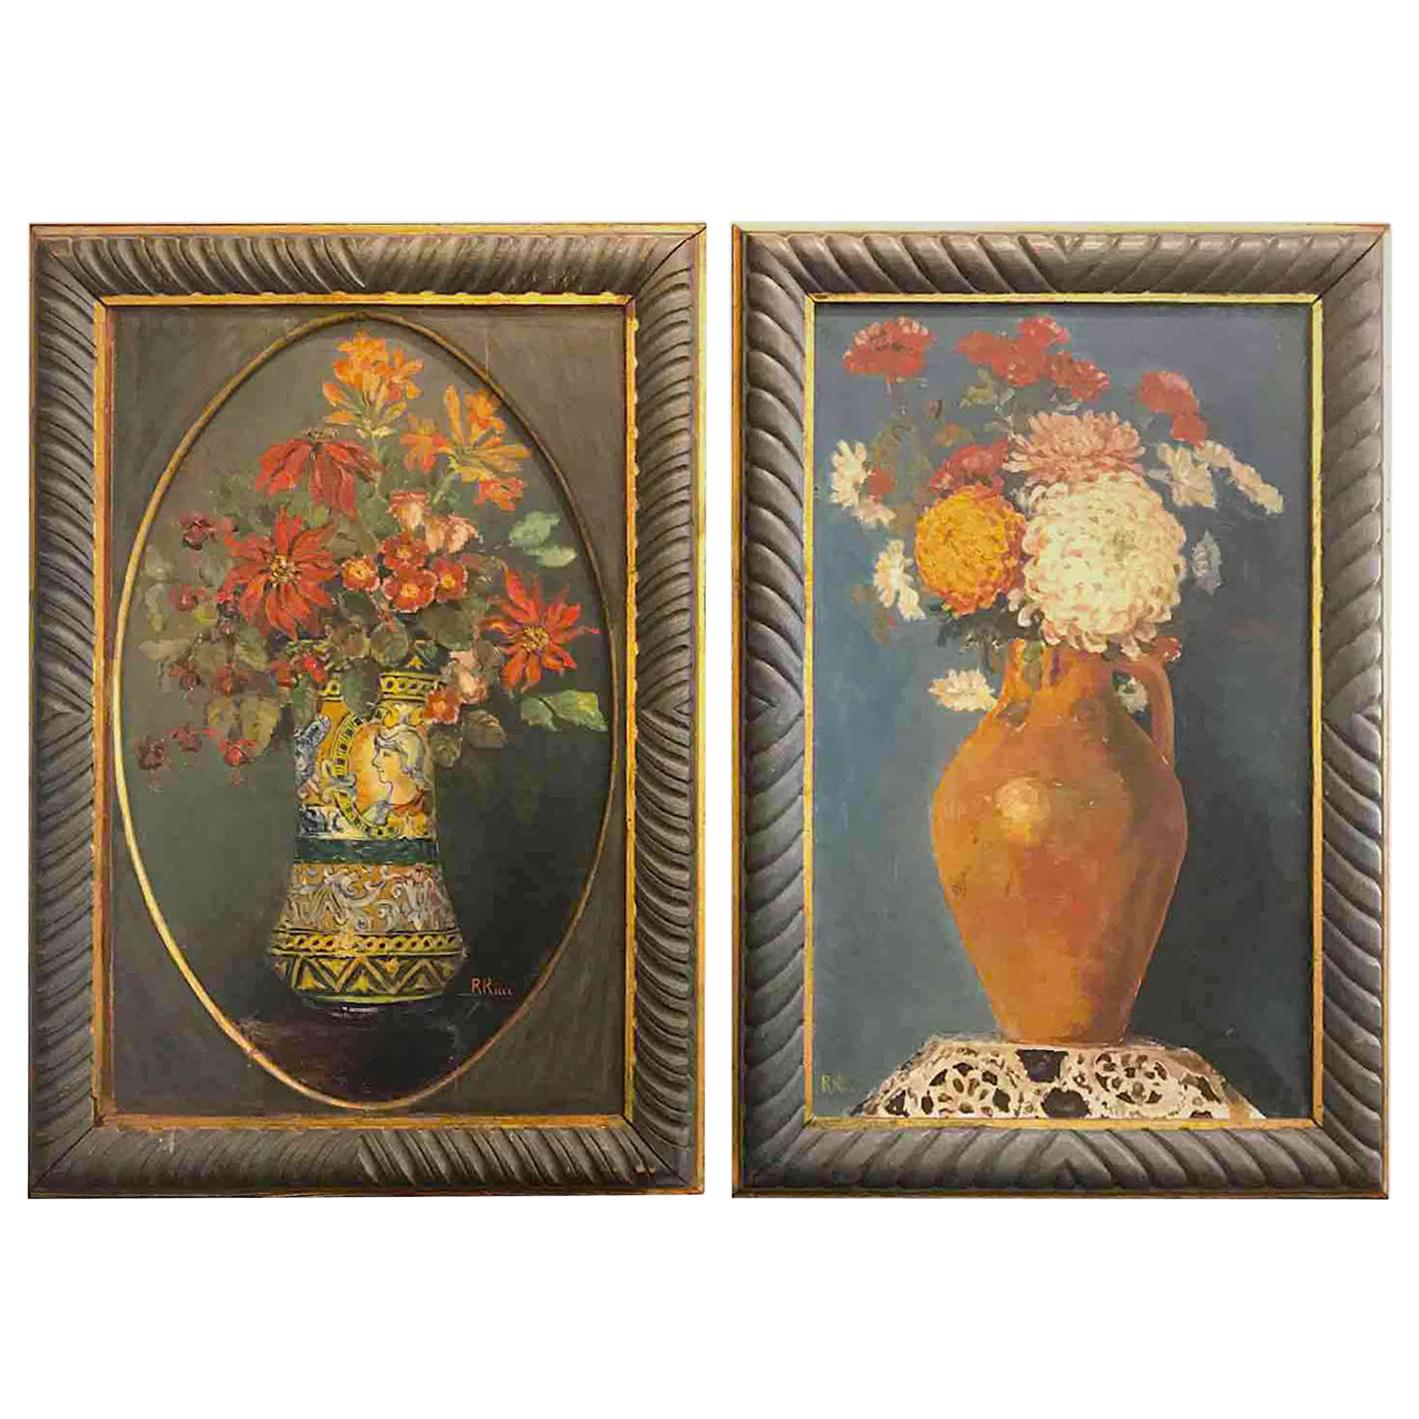 Pair of Italian Flower Still life Paintings by Ricci 20th Century Green Frames For Sale